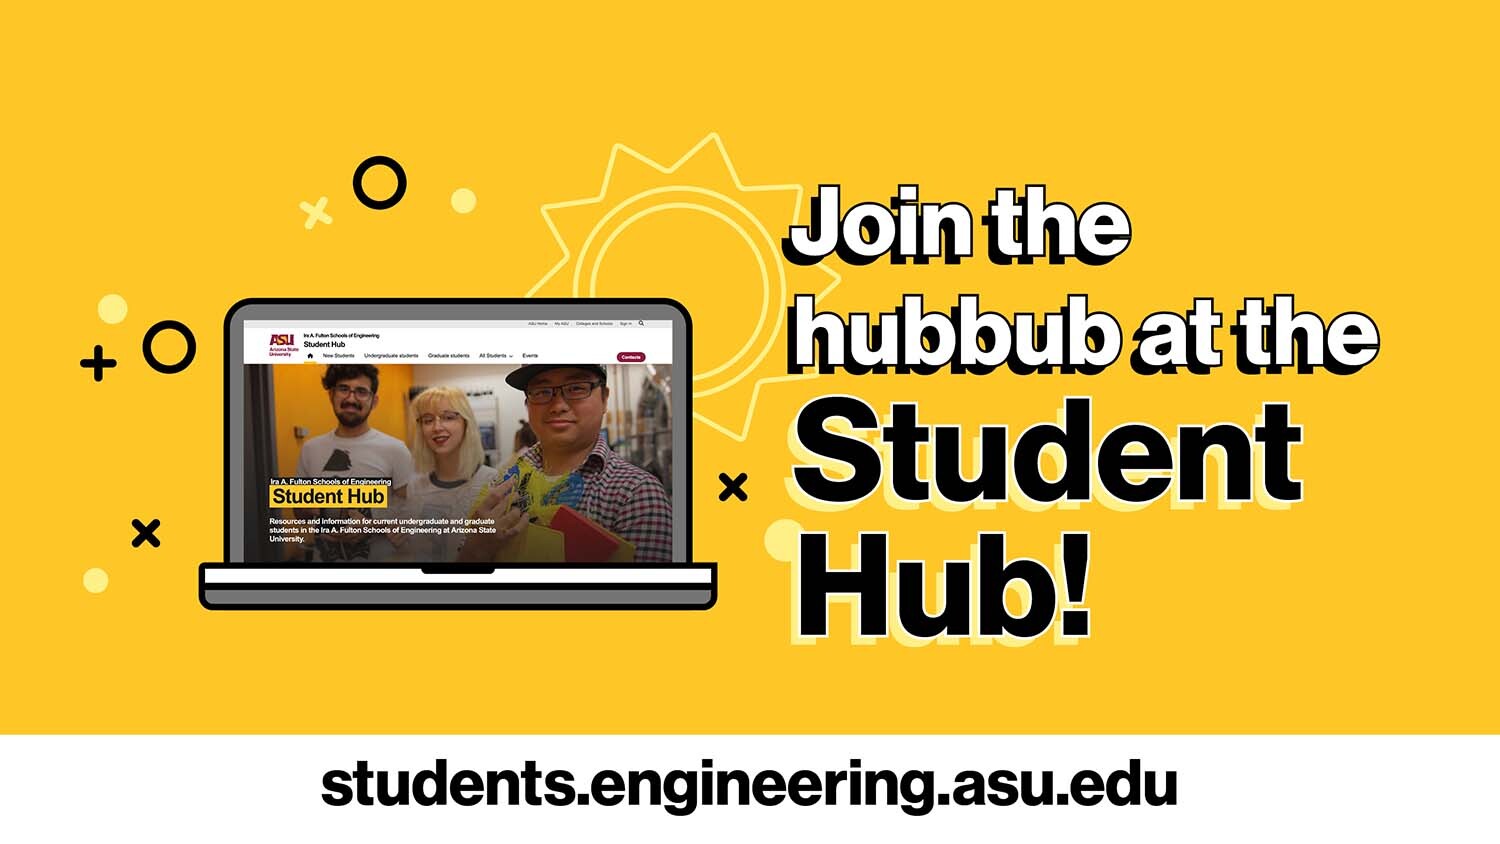 Join the hubbub at the Student Hub!